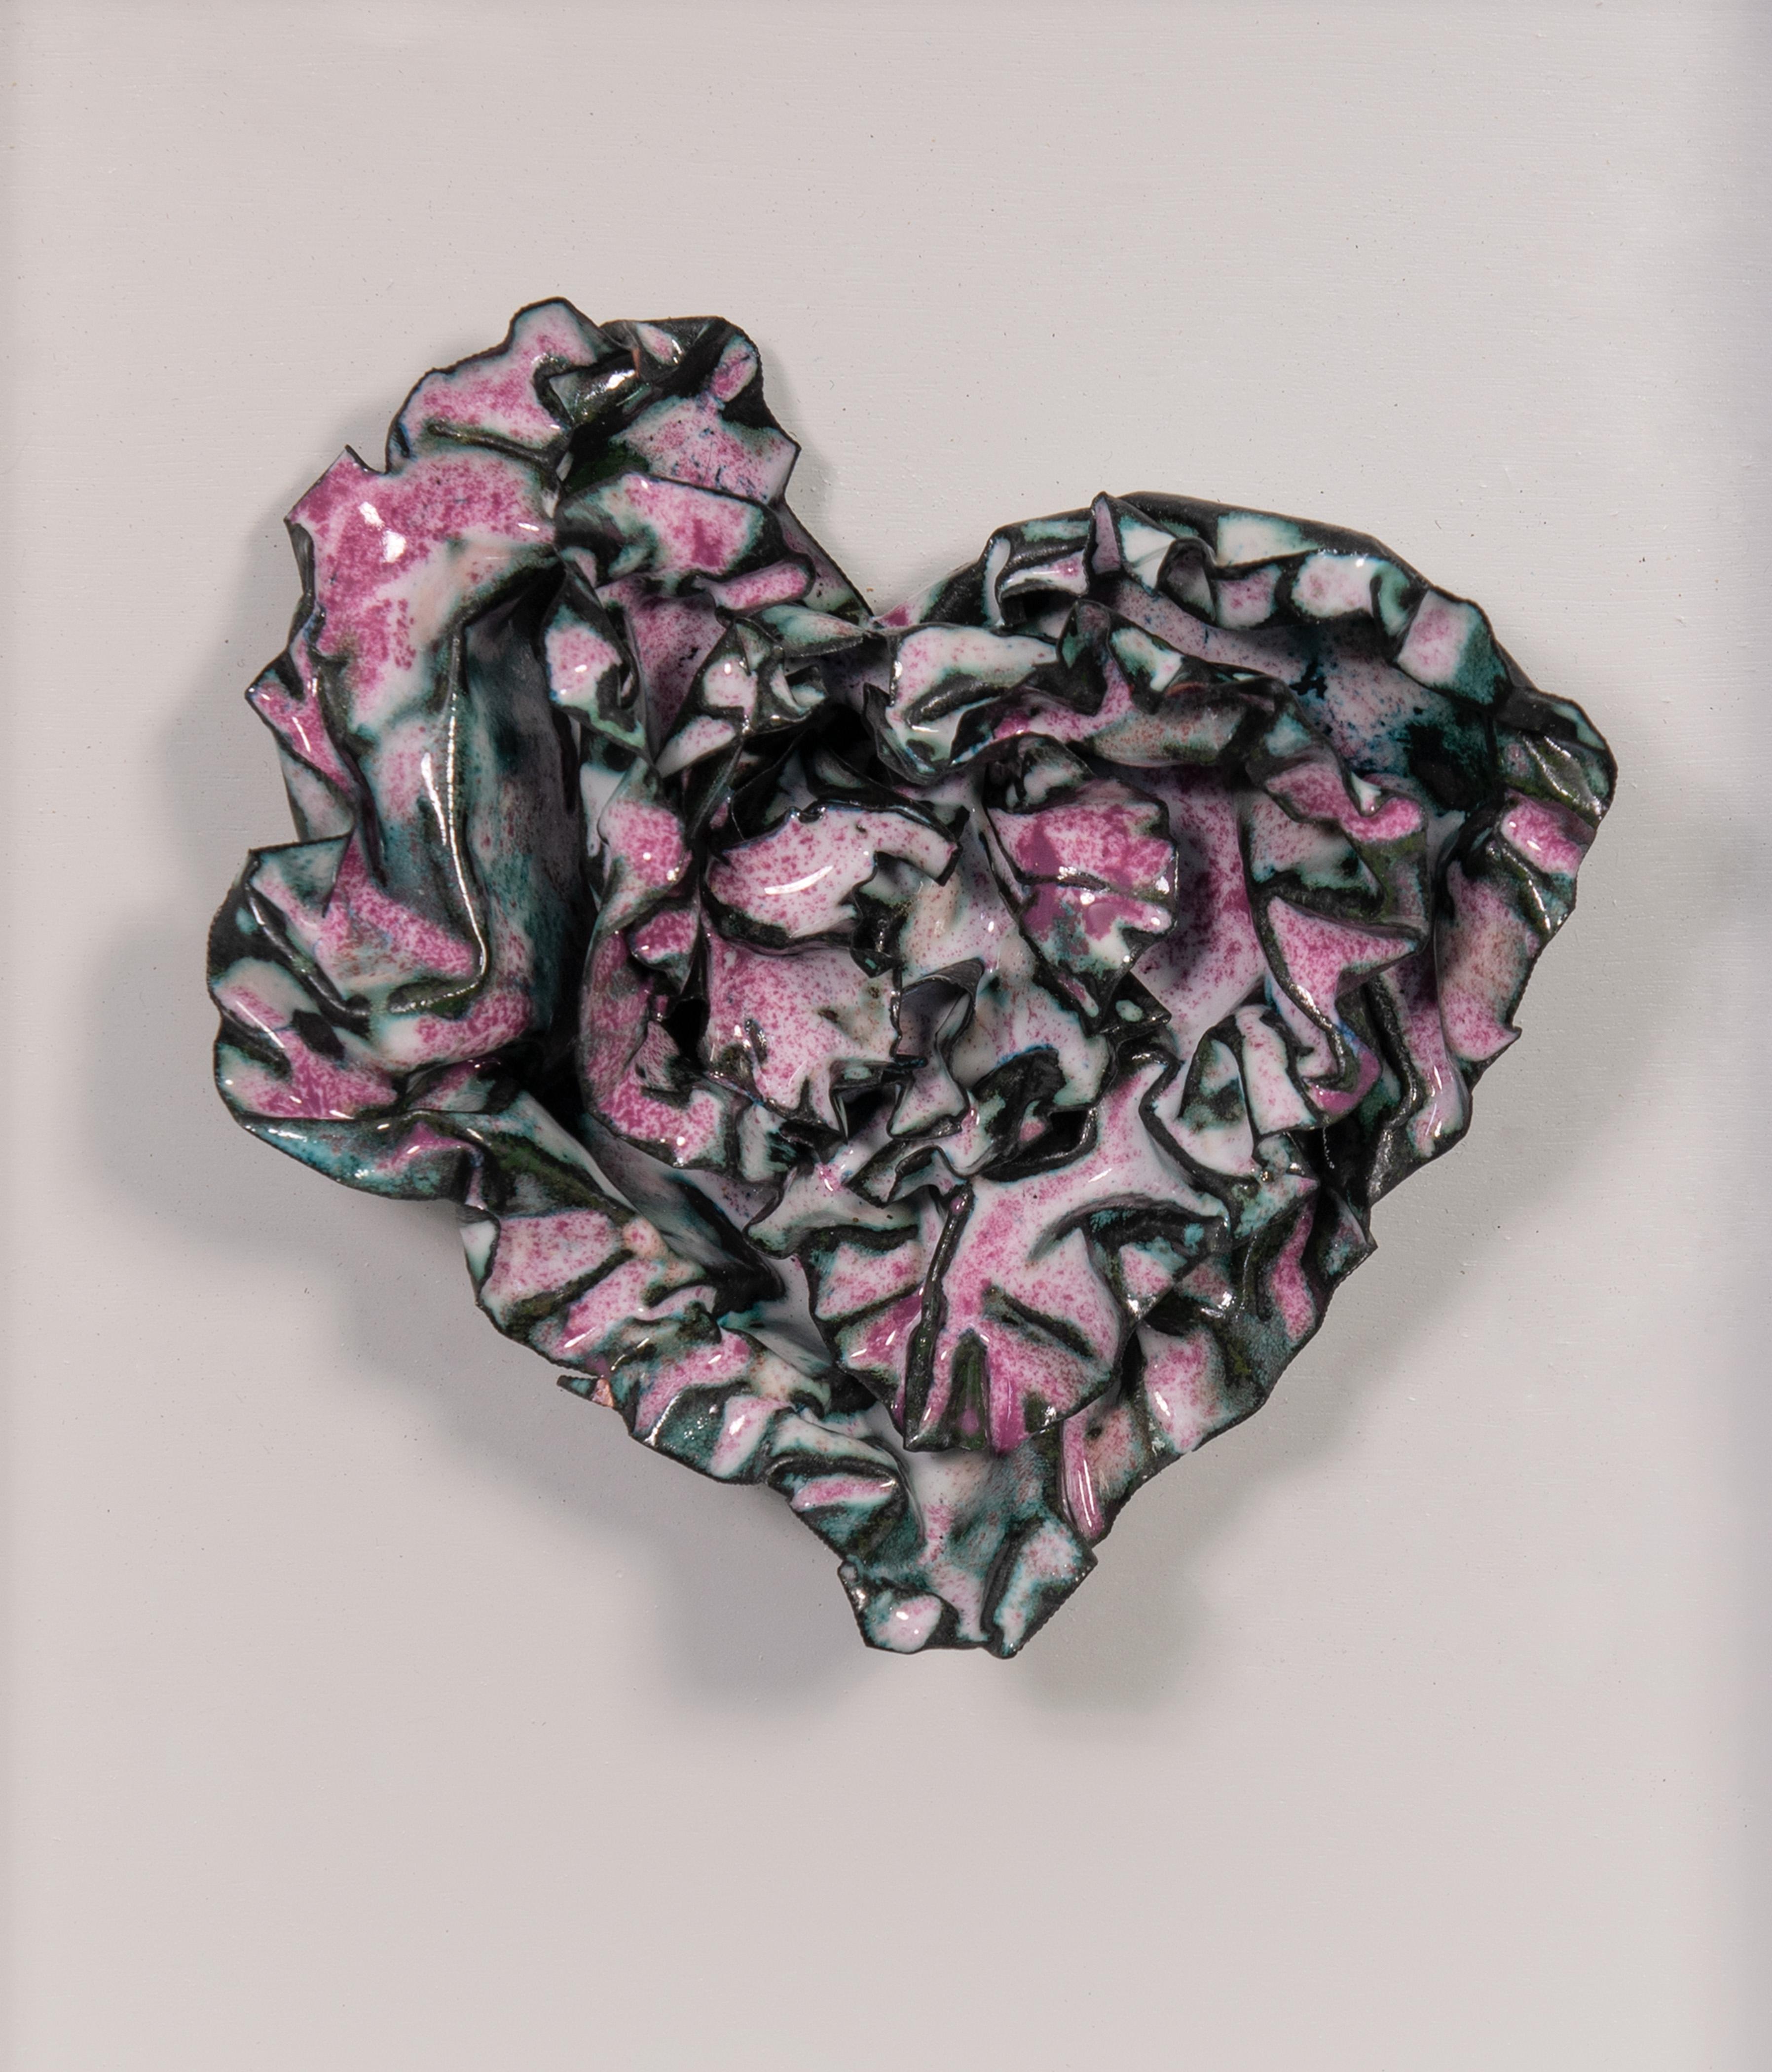 Speckled Heart is a delightful abstract sculpture by artist Sherry Been. This Heart sculpture is a whimsical celebration of love and emotion.
Speckled Heart invites viewers into a world of playful creativity and enchantment. Against a white